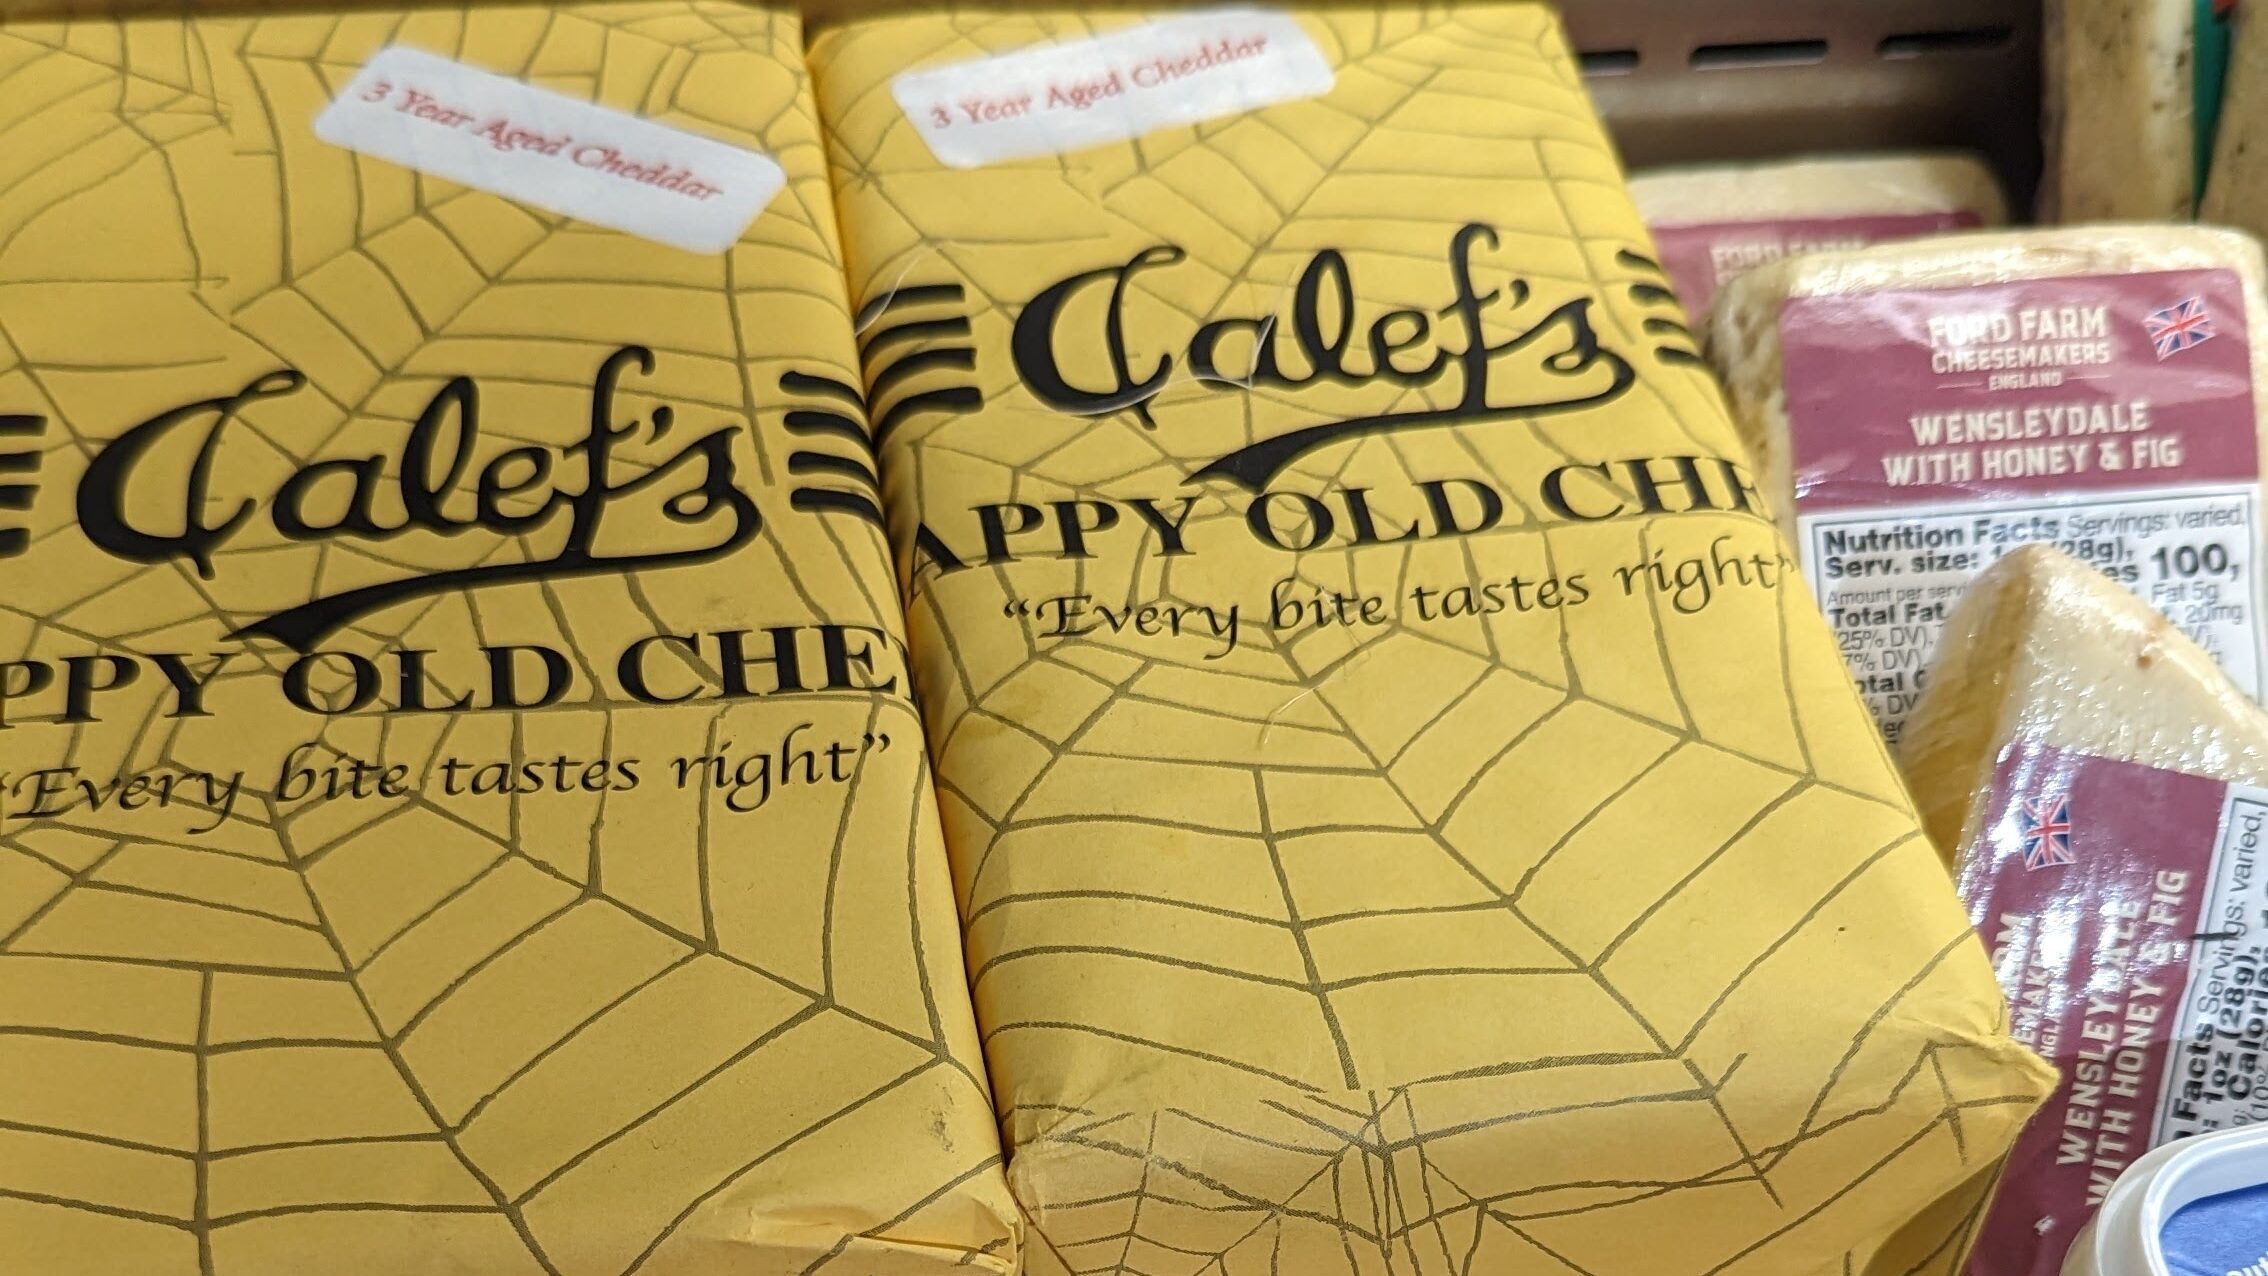 Calef's Reserve Cheddar Cheese